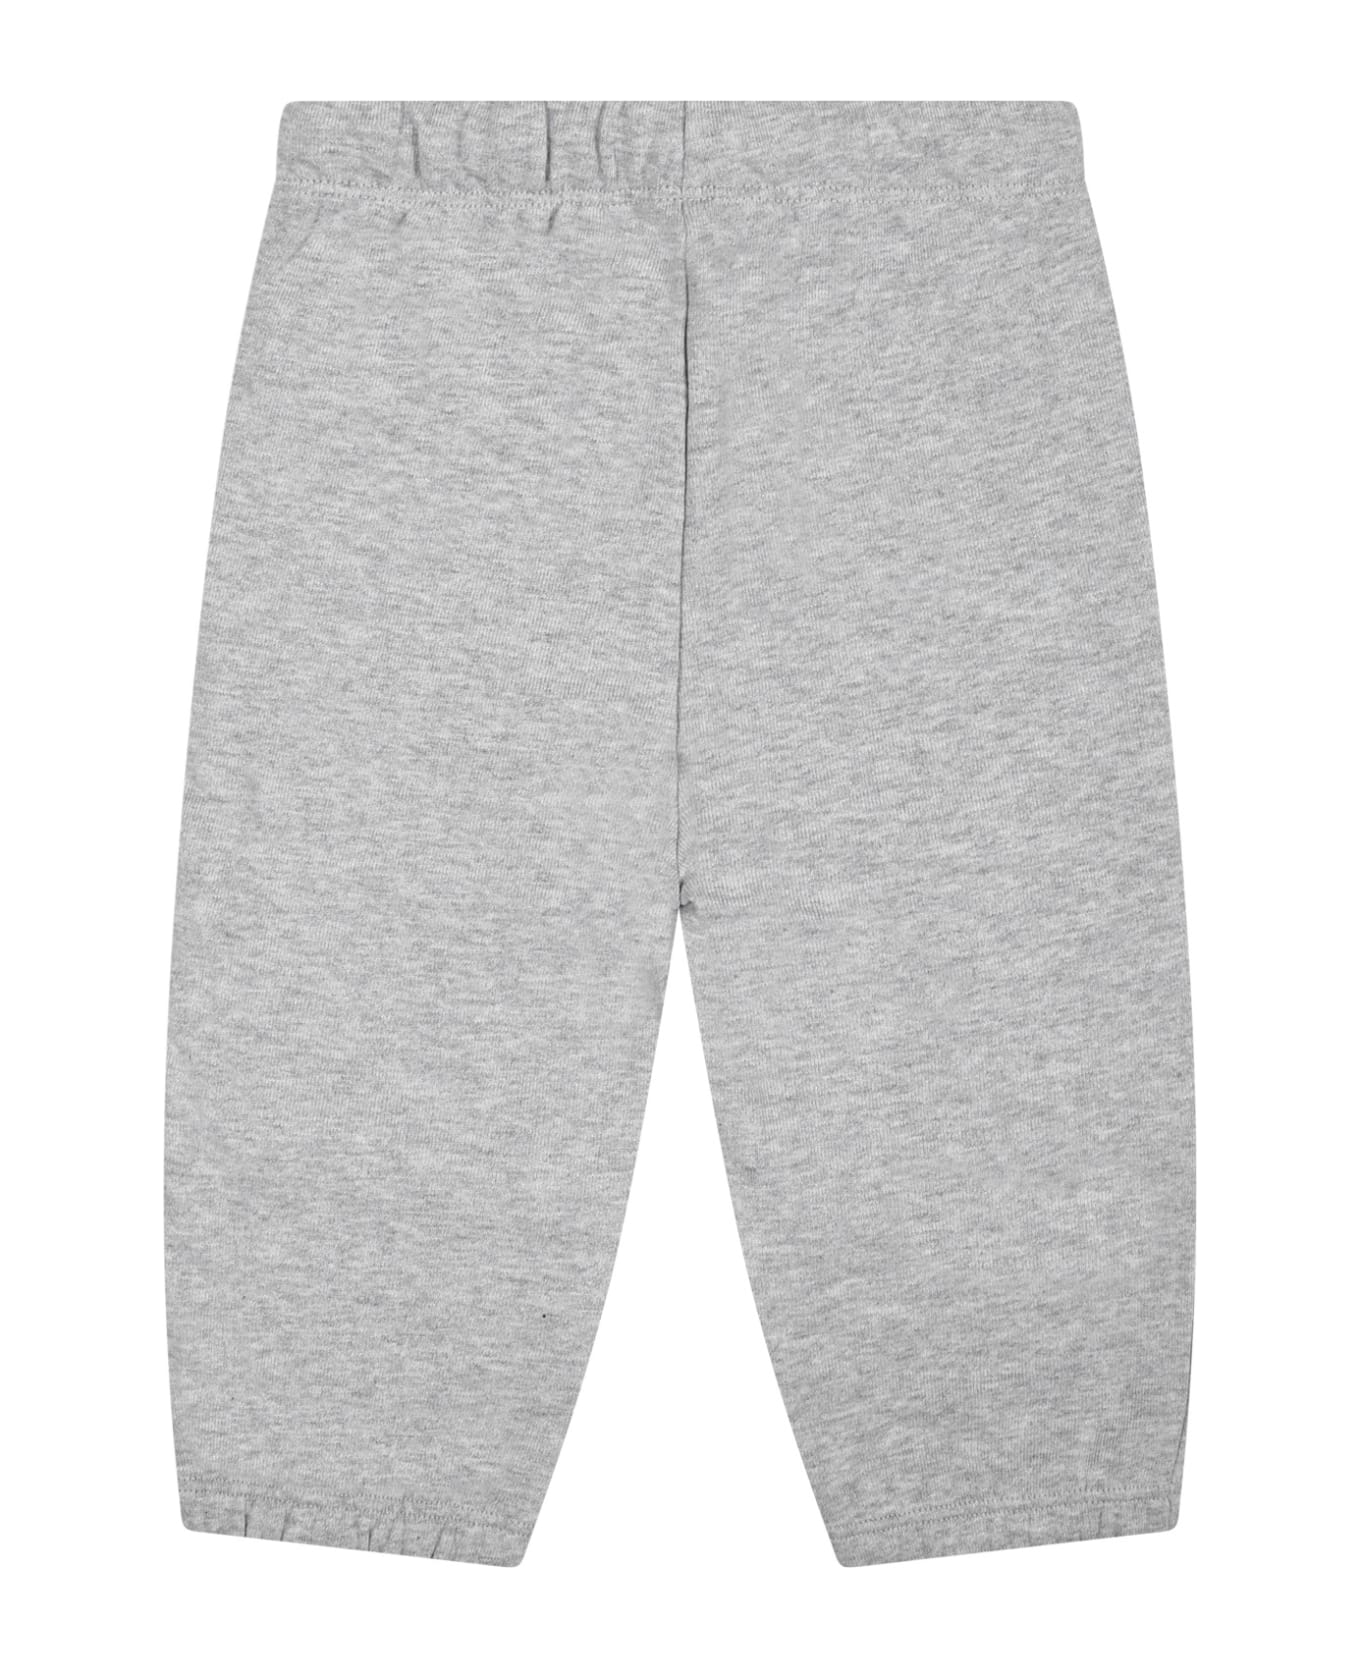 Stella McCartney Kids Gray Trousers For Baby Boy With Shark Fin Print - Grey